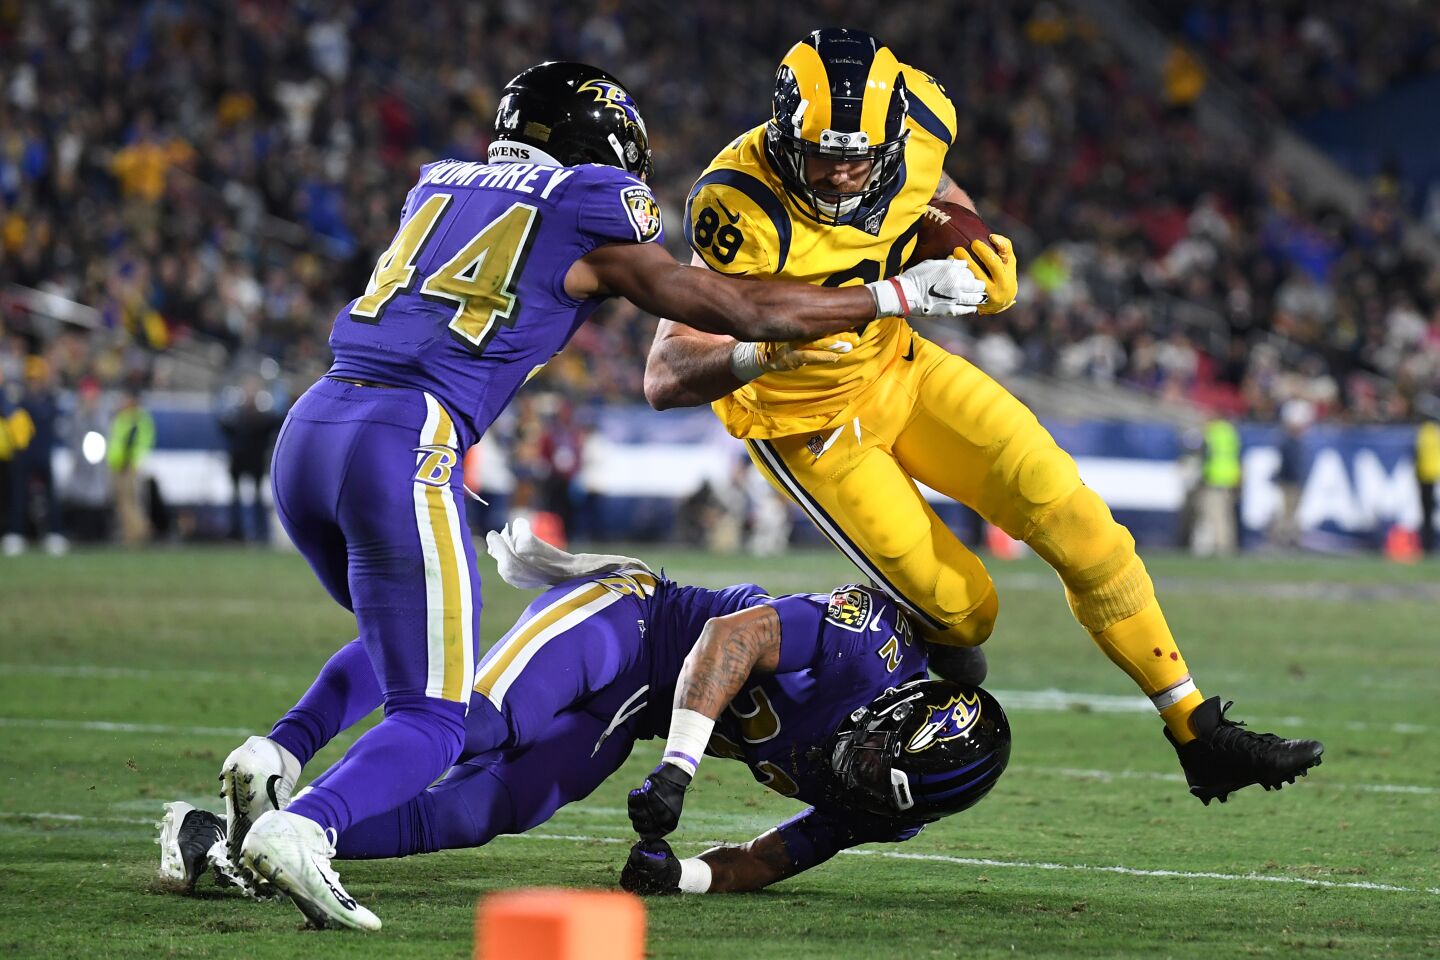 Rams tight end Tyler Higbee is stopped short of the goal line by Ravens cornerbacks Marlon Humphrey (44) and Jimmy Smith during the second quarter of a game Nov. 25 at the Coliseum.